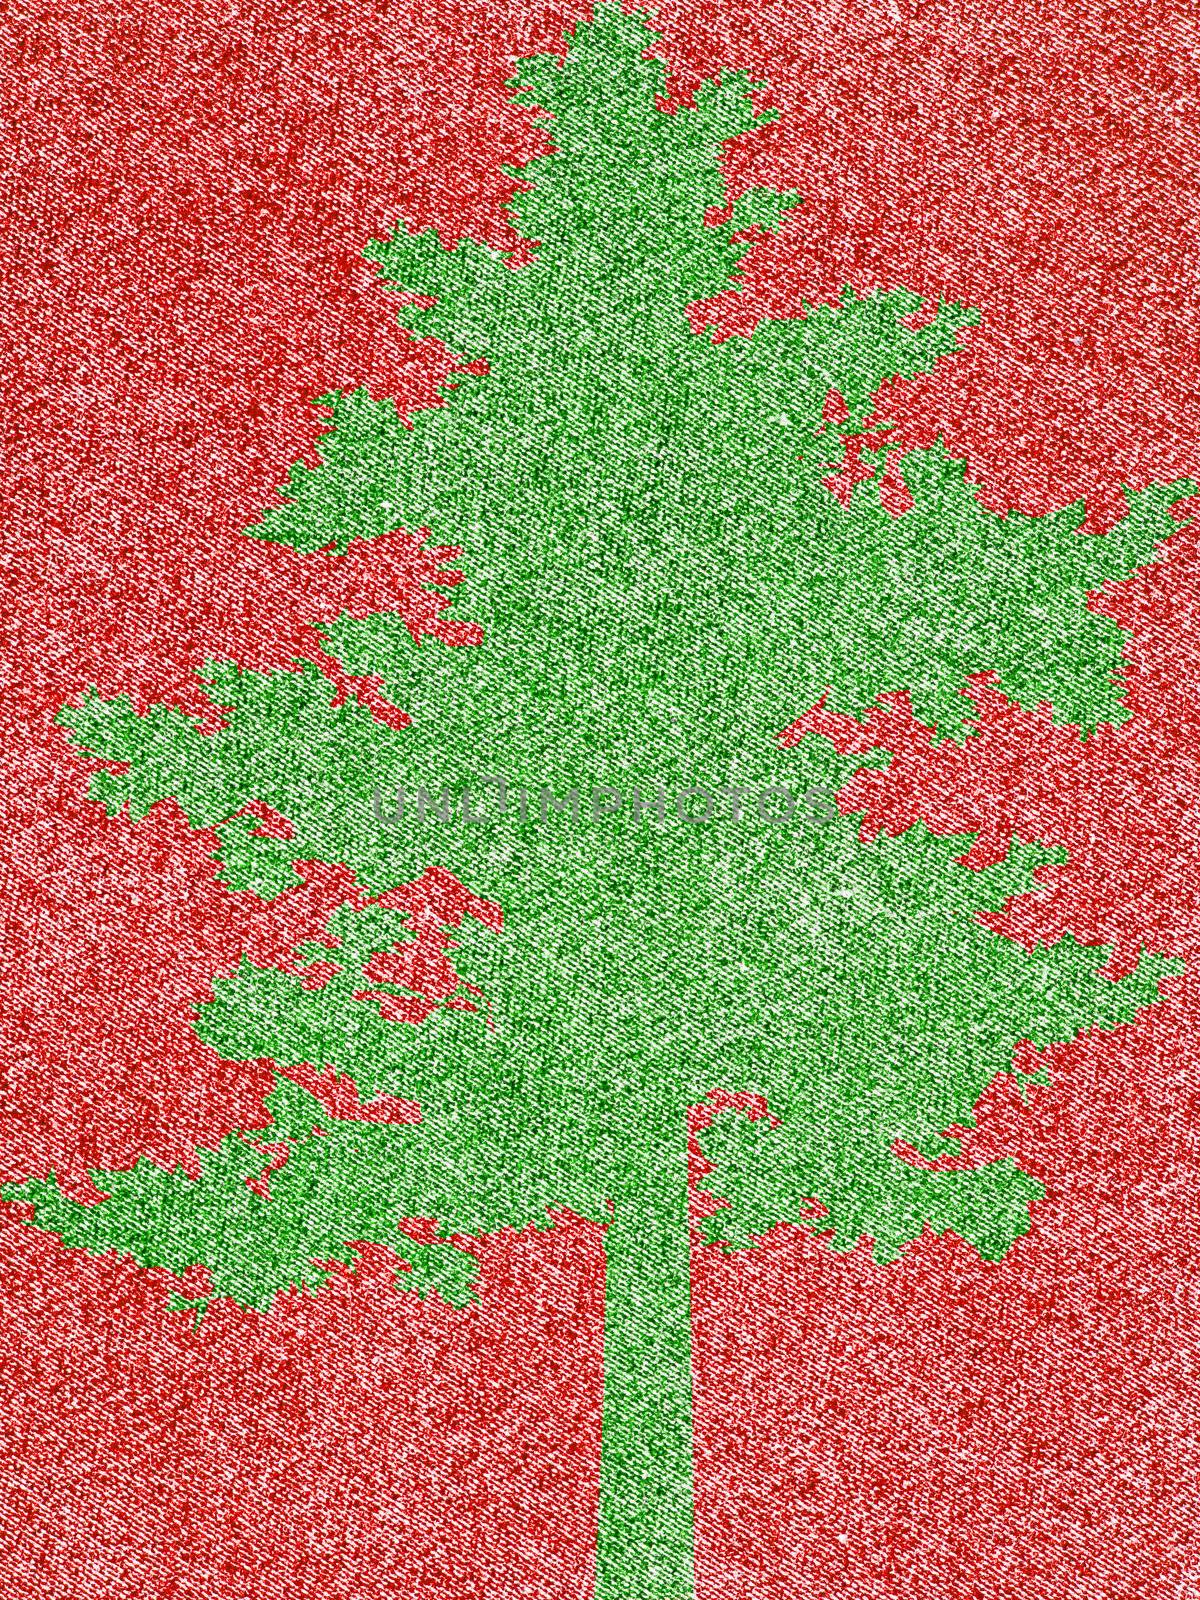 Denim Fabric in Christmas Colors Forming a Tree Frame